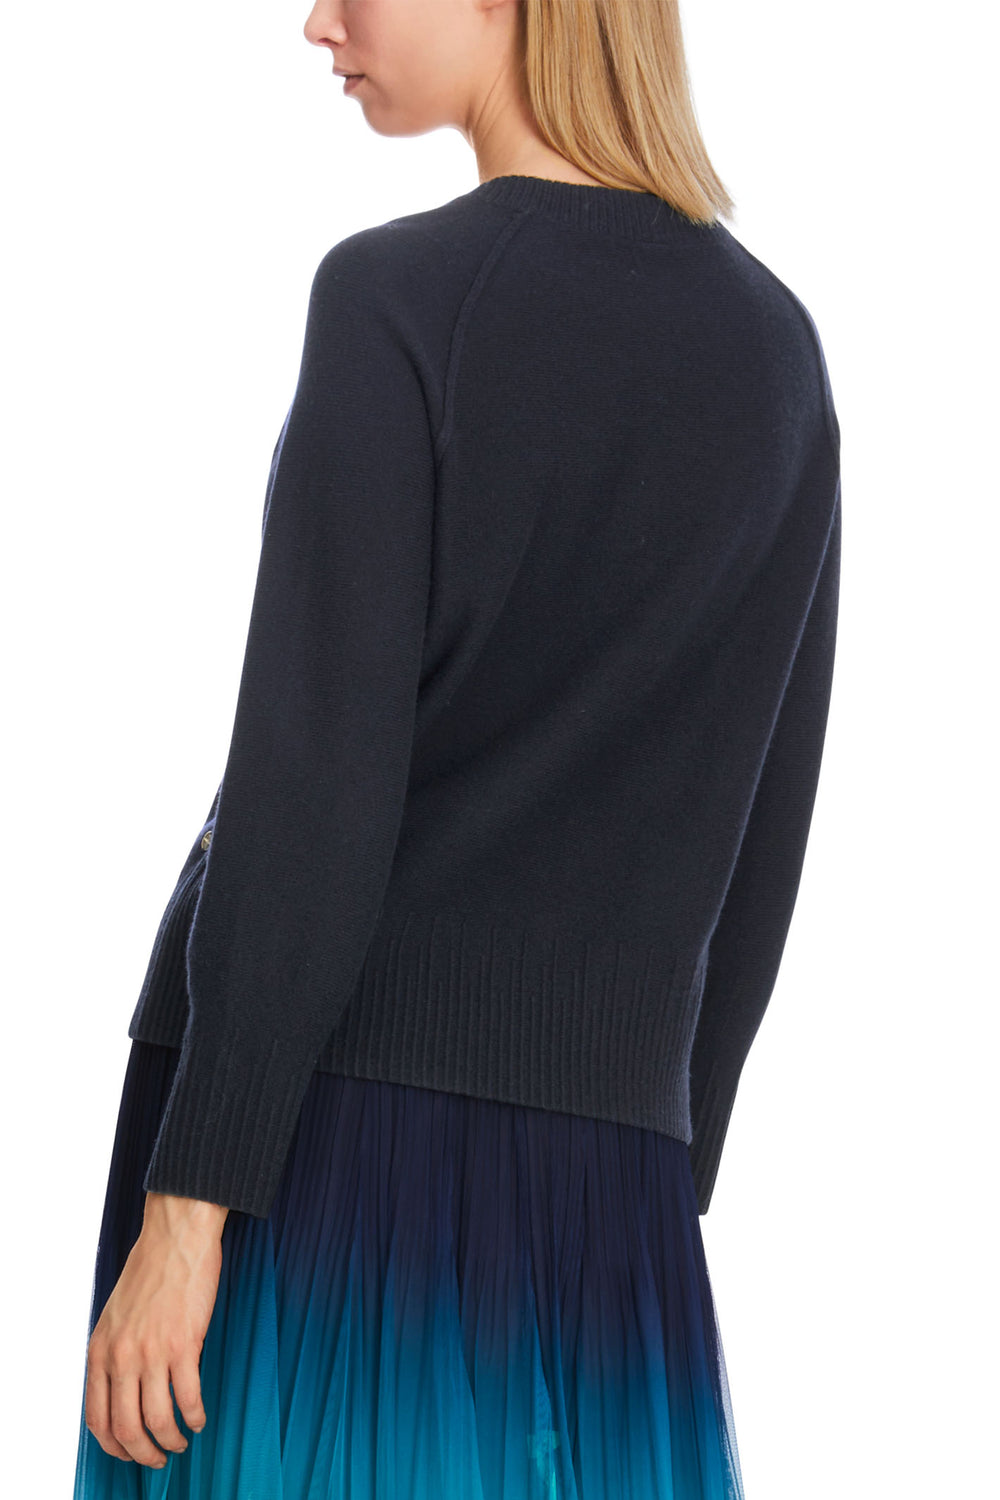 Marc Cain Collection XC 41.25 M51 395 Midnight Blue Jumper - Olivia Grace Fashion